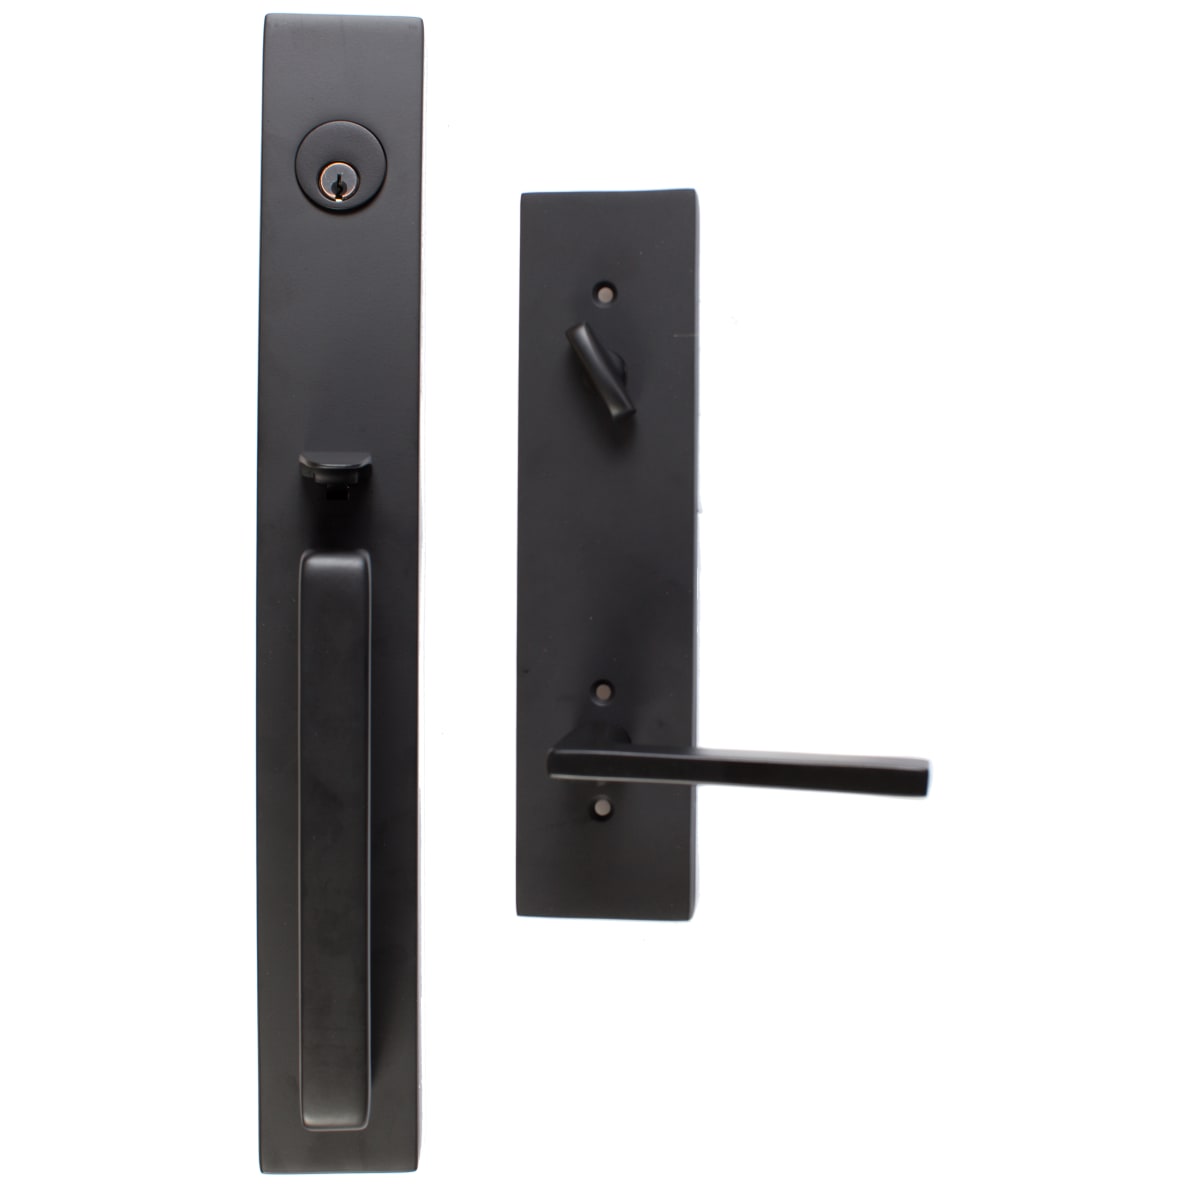 EMTEK Lugano Mortise Entry Set with Matching Finish Lancaster Knob Choice  of Left/Right Handing Available in Finishes F20334875LNRHUS26 Rig 